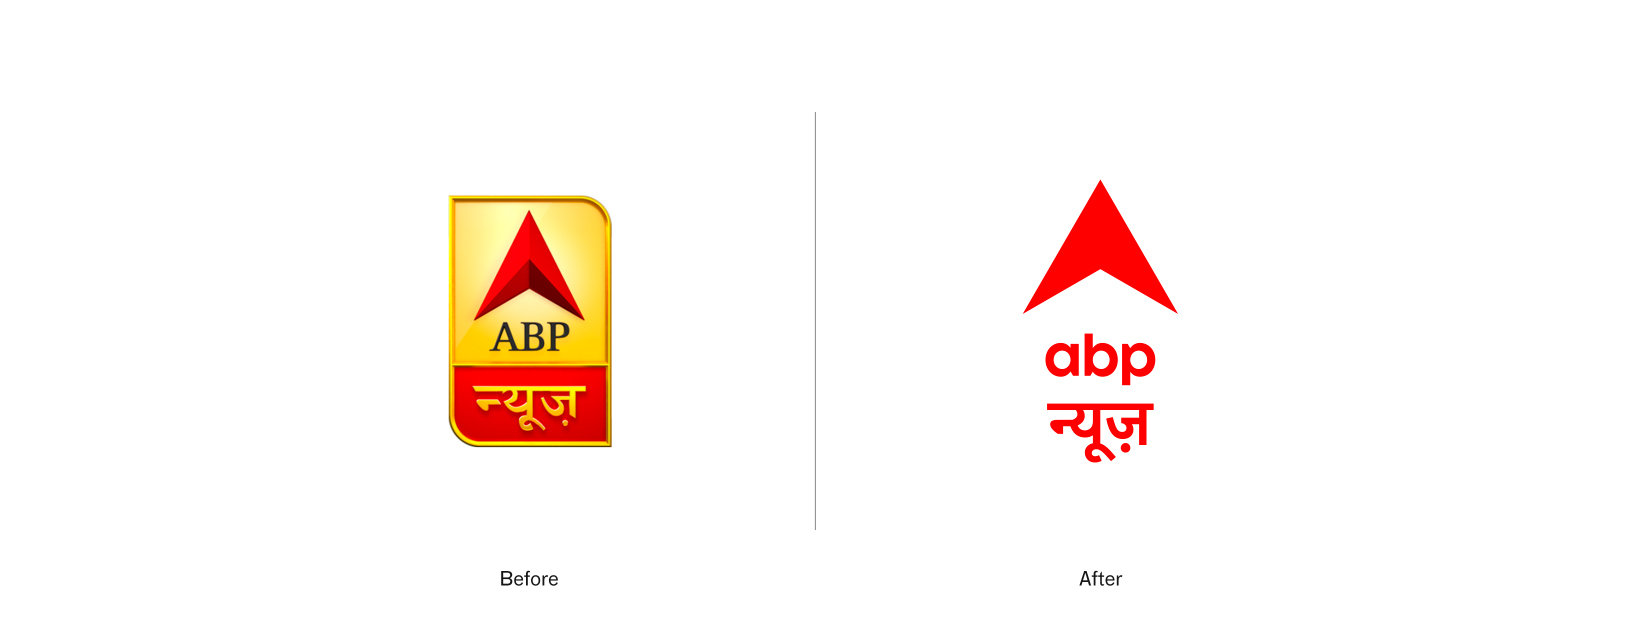 ABP News Live Updates by iDroid App